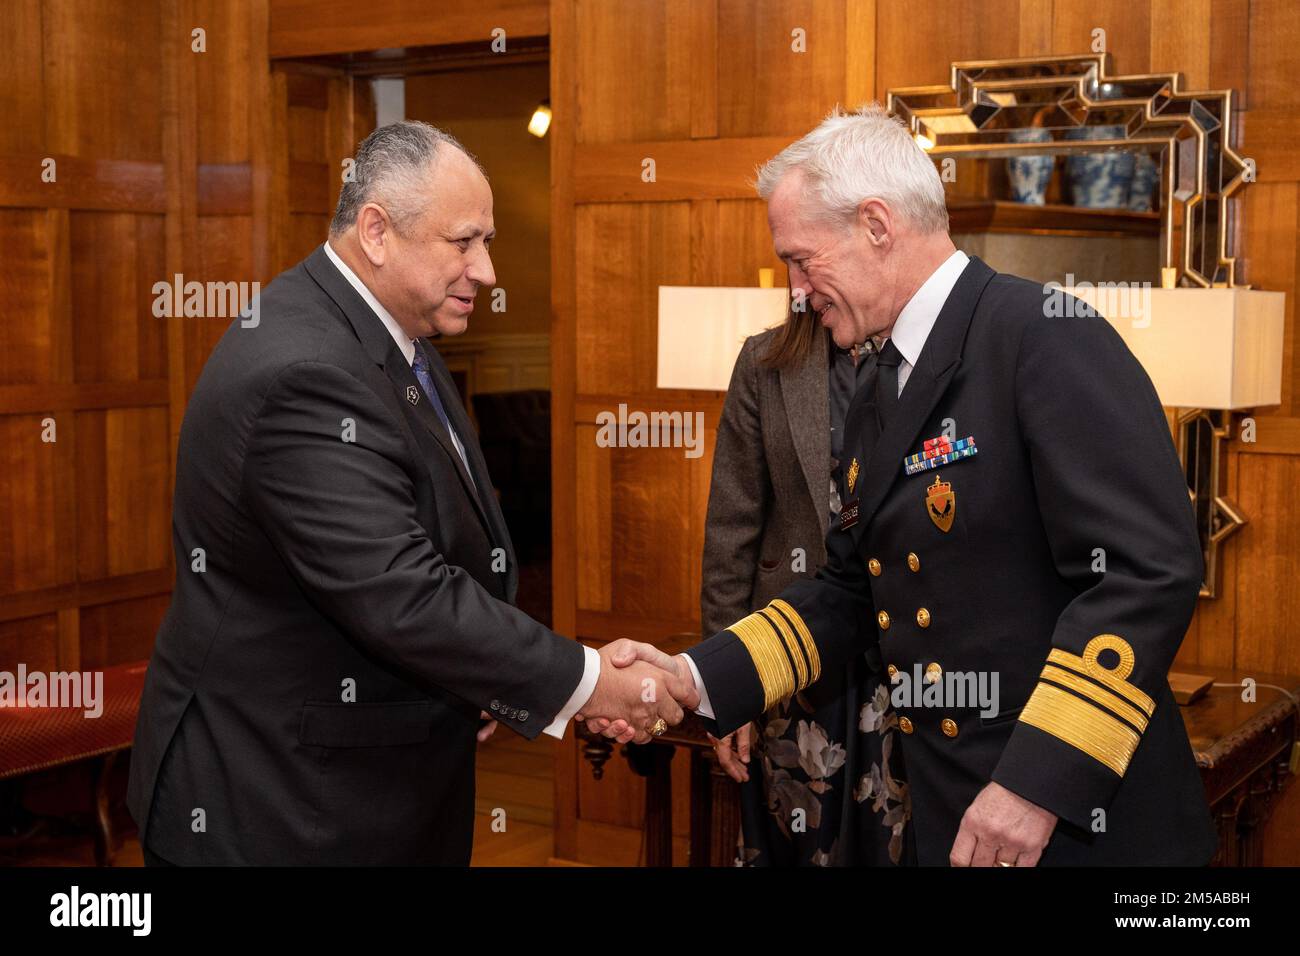 OSLO, Norway (Feb. 15, 2022) — Secretary of the Navy Carlos Del Toro greets Vice Adm. Nils Andreas Stensønes, director, Norwegian Intelligence Service, in Oslo, Norway, Feb. 15, 2022. Secretary Del Toro is in Norway to visit U.S. service members and Norwegian government leaders to reinforce existing bilateral and multilateral security relationships between the U.S. Navy and the Royal Norwegian Navy. Stock Photo